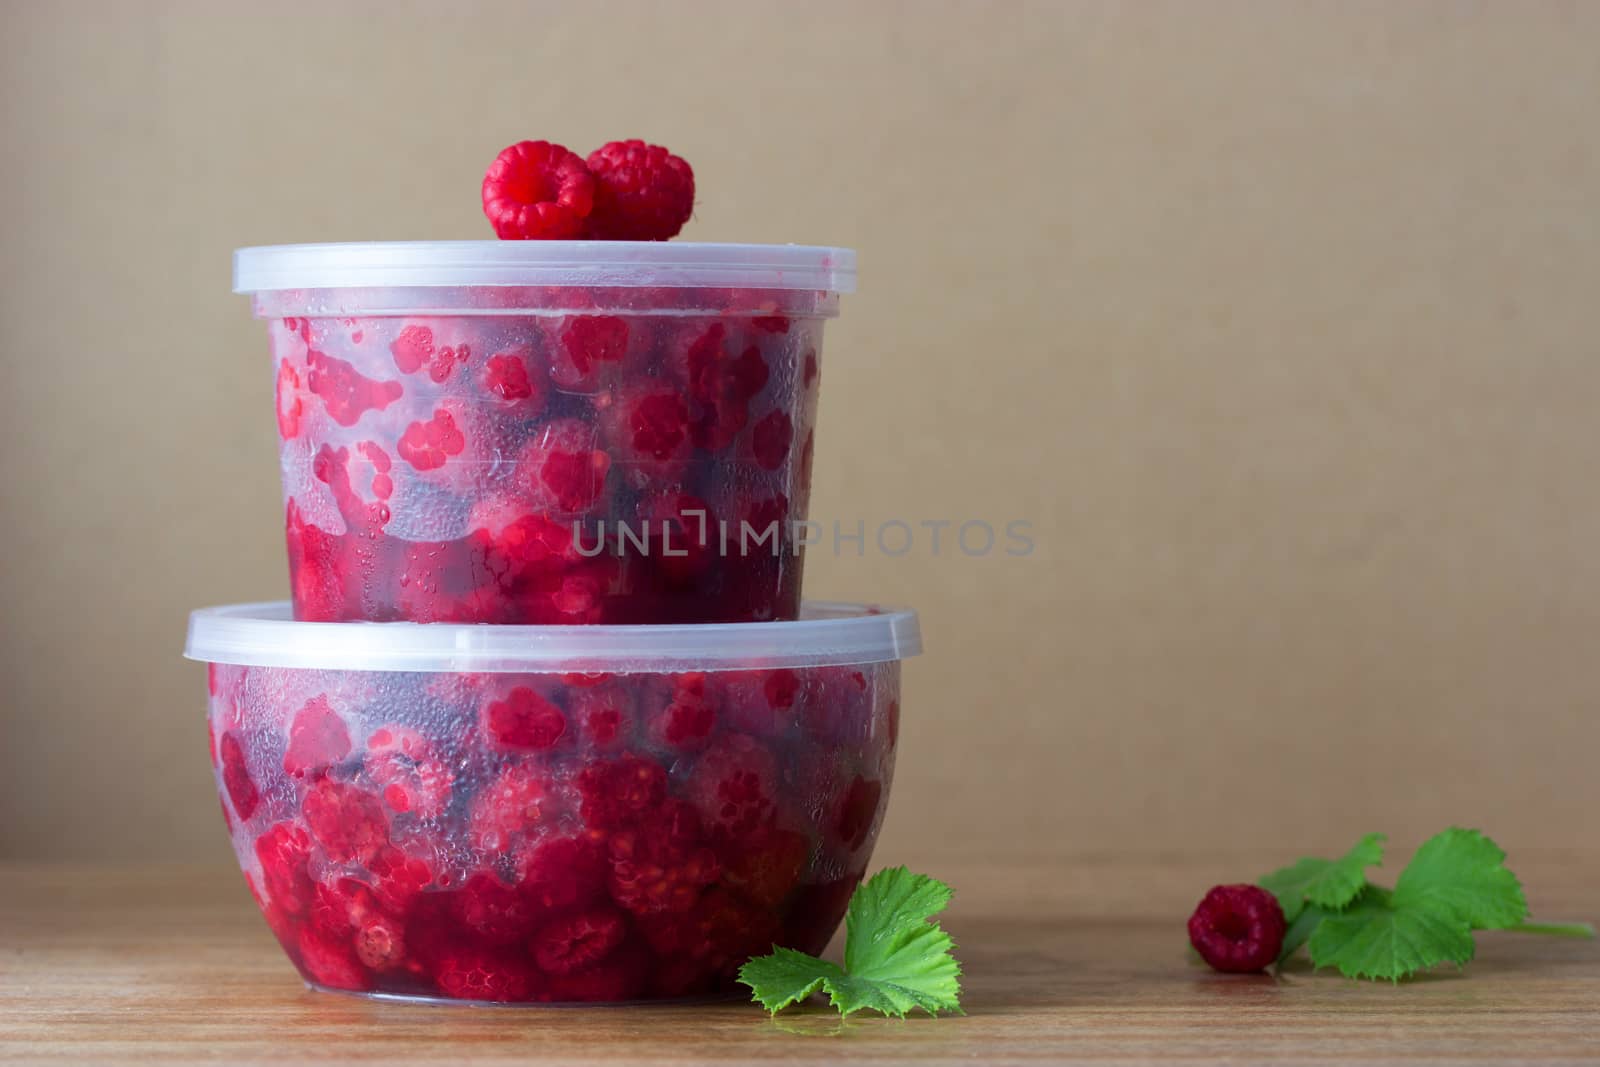 Raspberry in the round box with leaf of mint on the old wood background